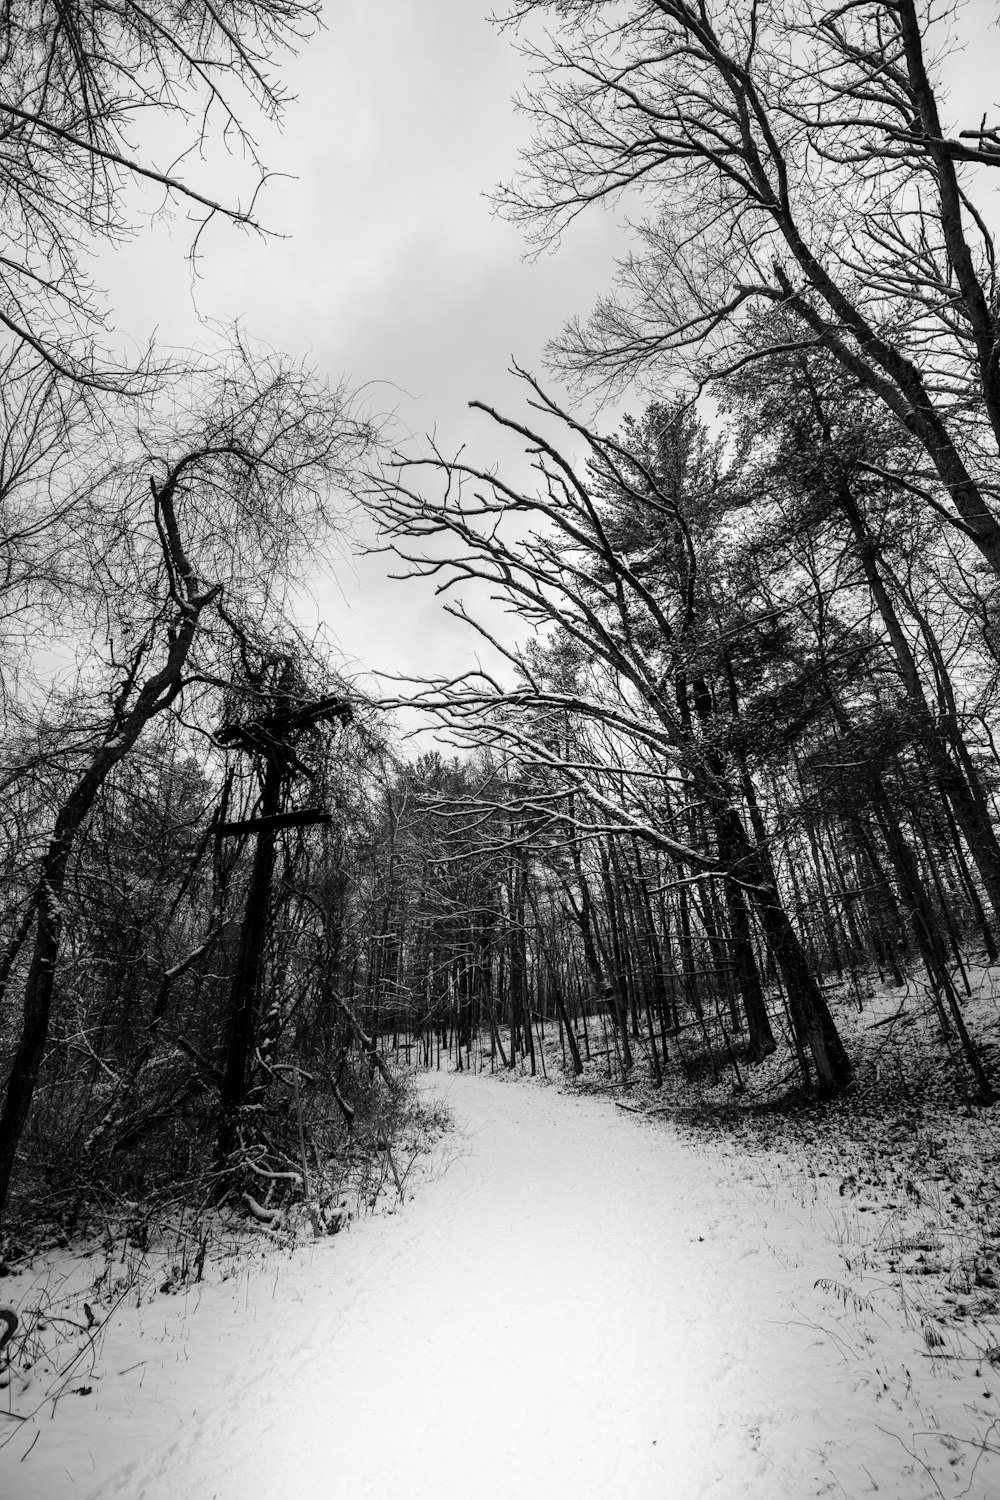 A snow covered path through a forest filled with trees photo – Free ...